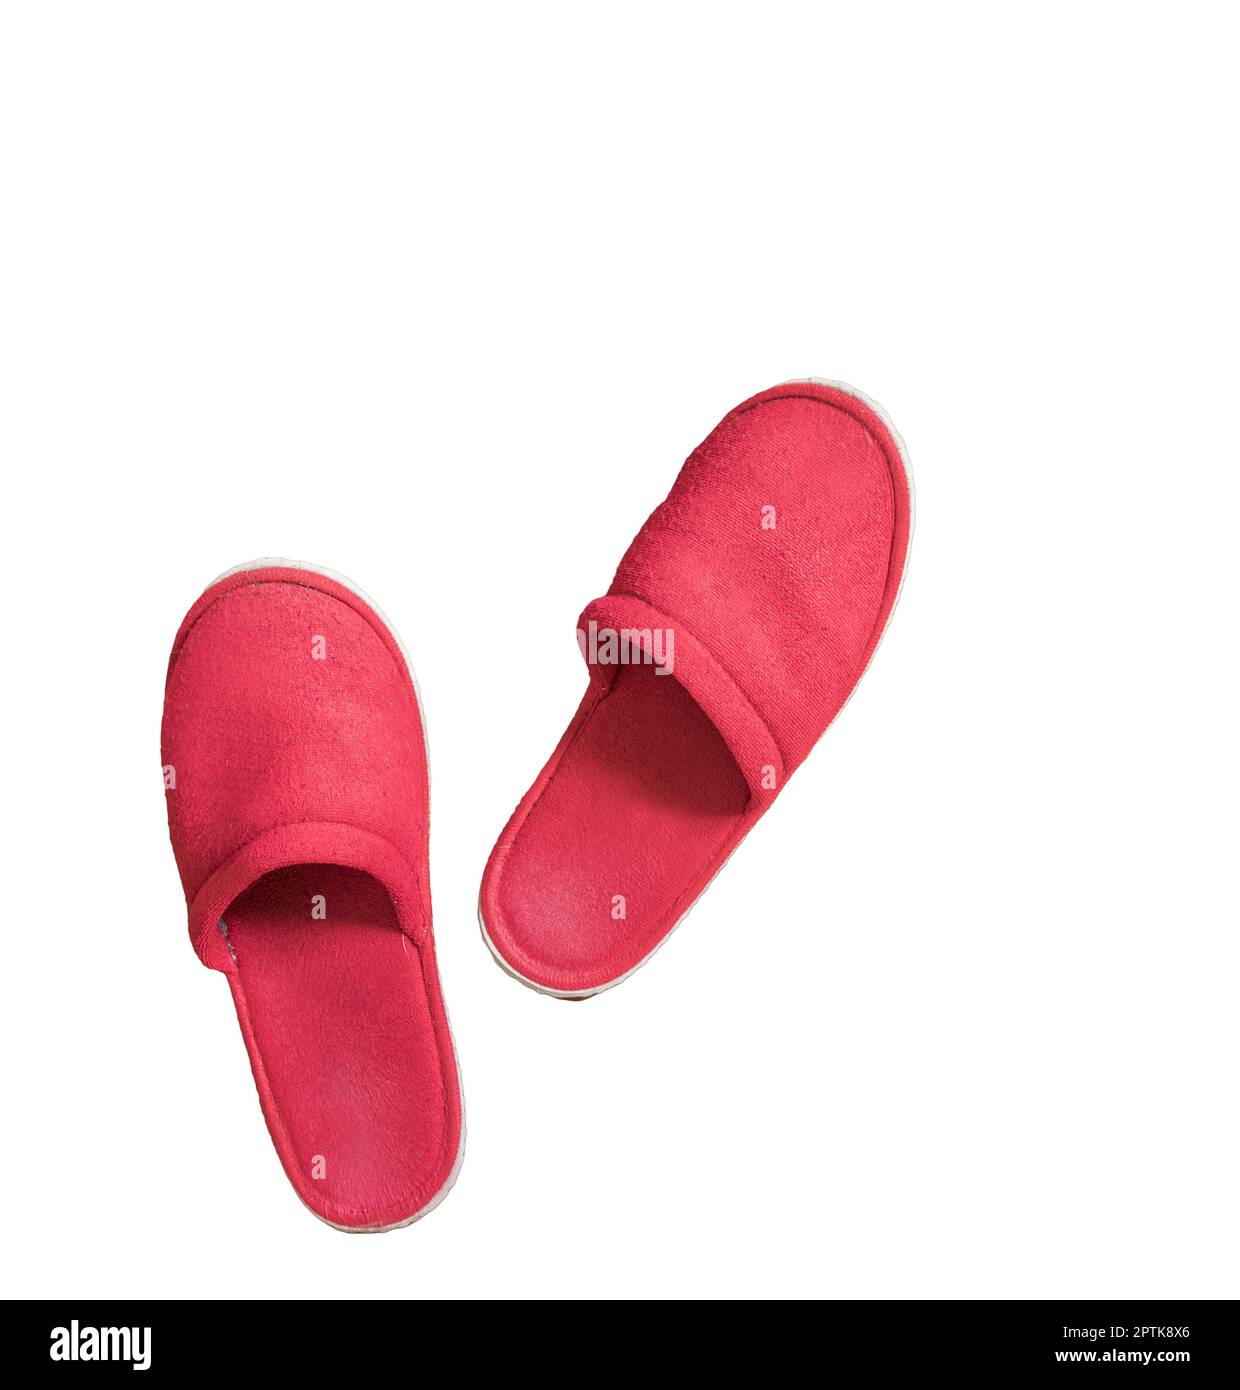 the red slippers on a transparent surface Stock Photo - Alamy